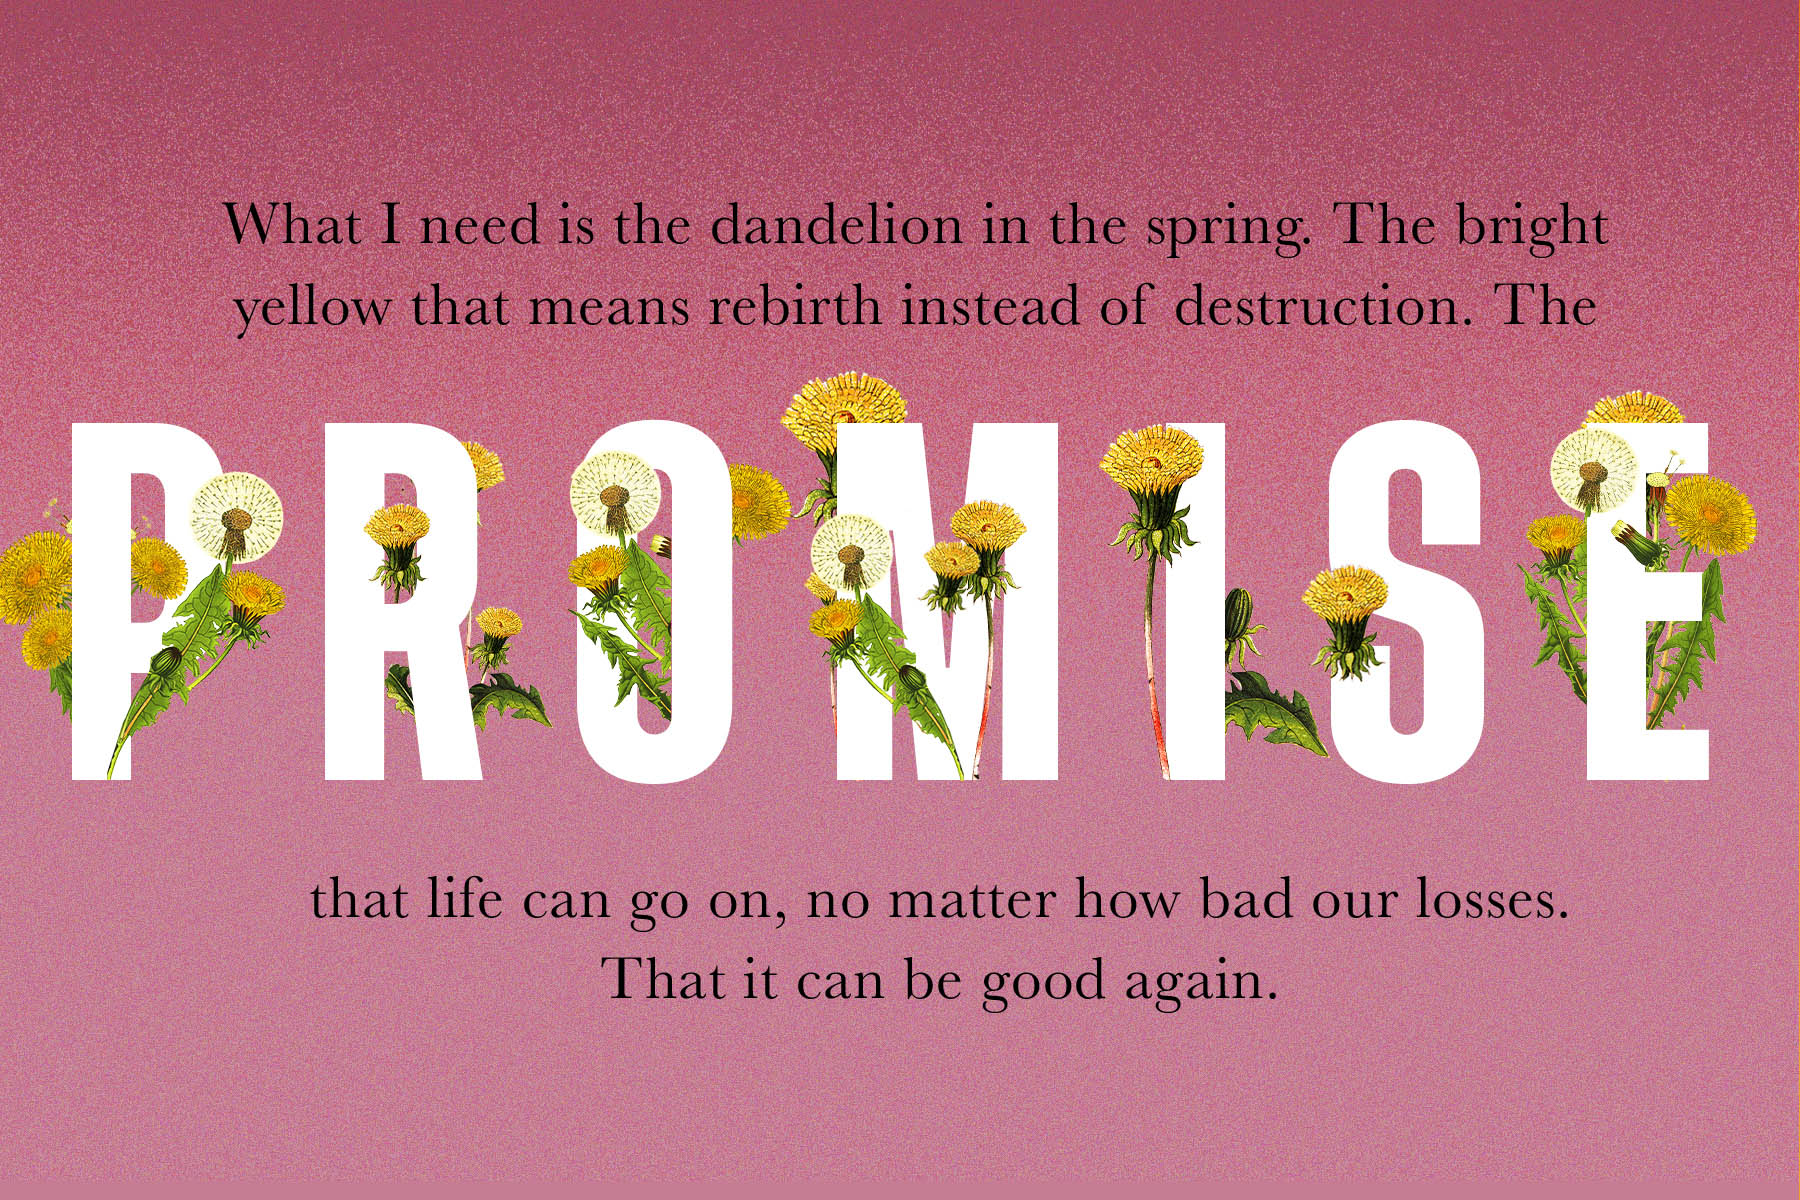 A joyous illustration of the word 'promise' with flowers growing out of the letters.